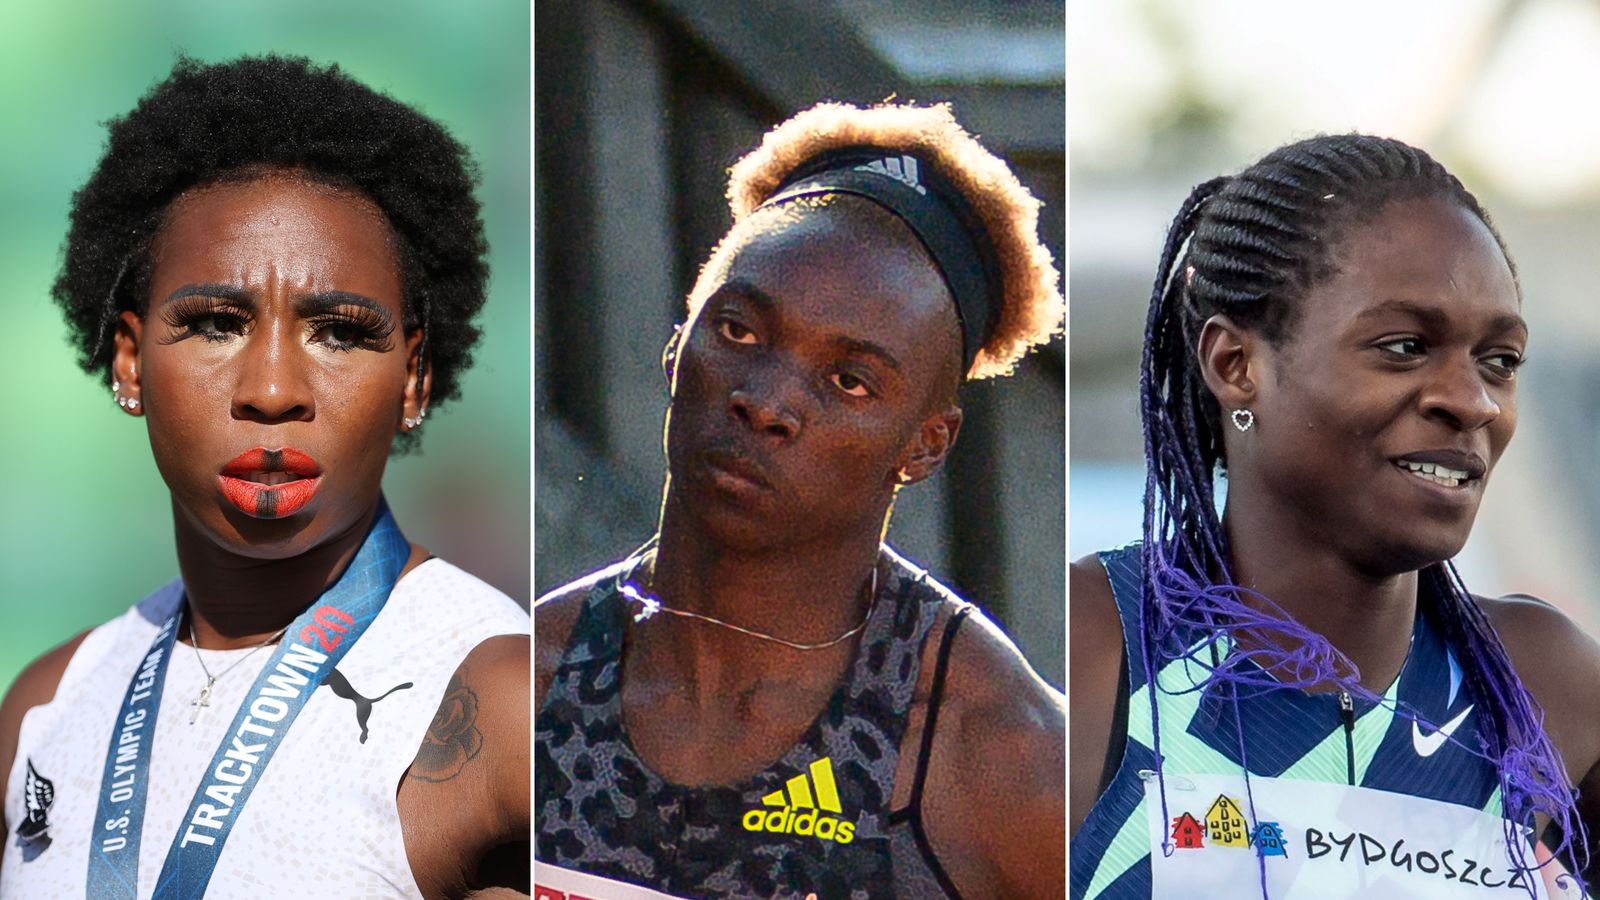 Black women athletes are still being scrutinized ahead of the Olympics  despite their successes